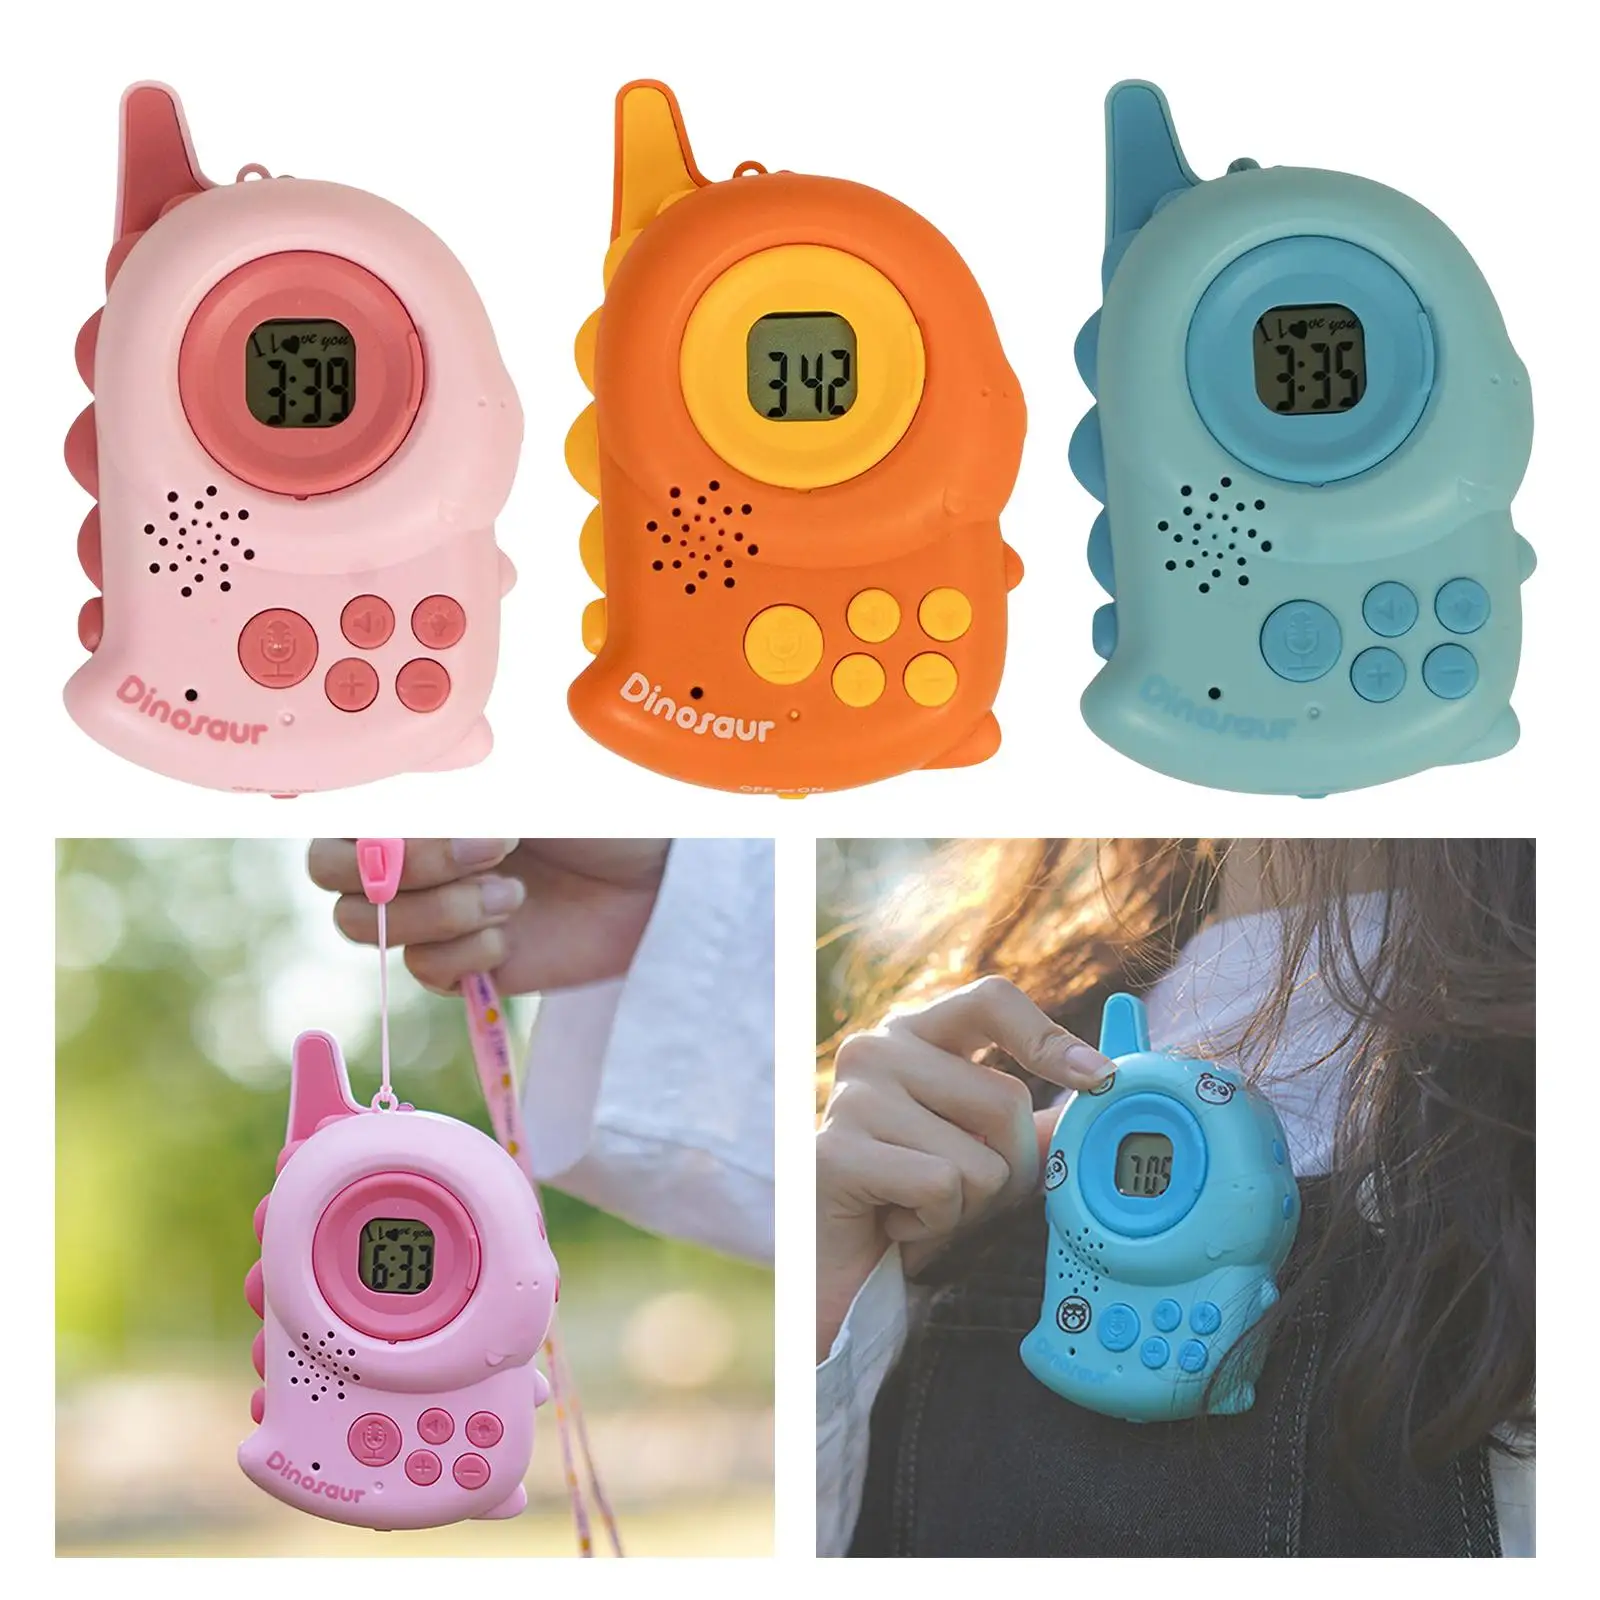 Portable Walkie Talkies for Kids Indoor Outdoor Toys Family Walky Talky Outdoor Camping Games for Spring Summer Outside Gifts